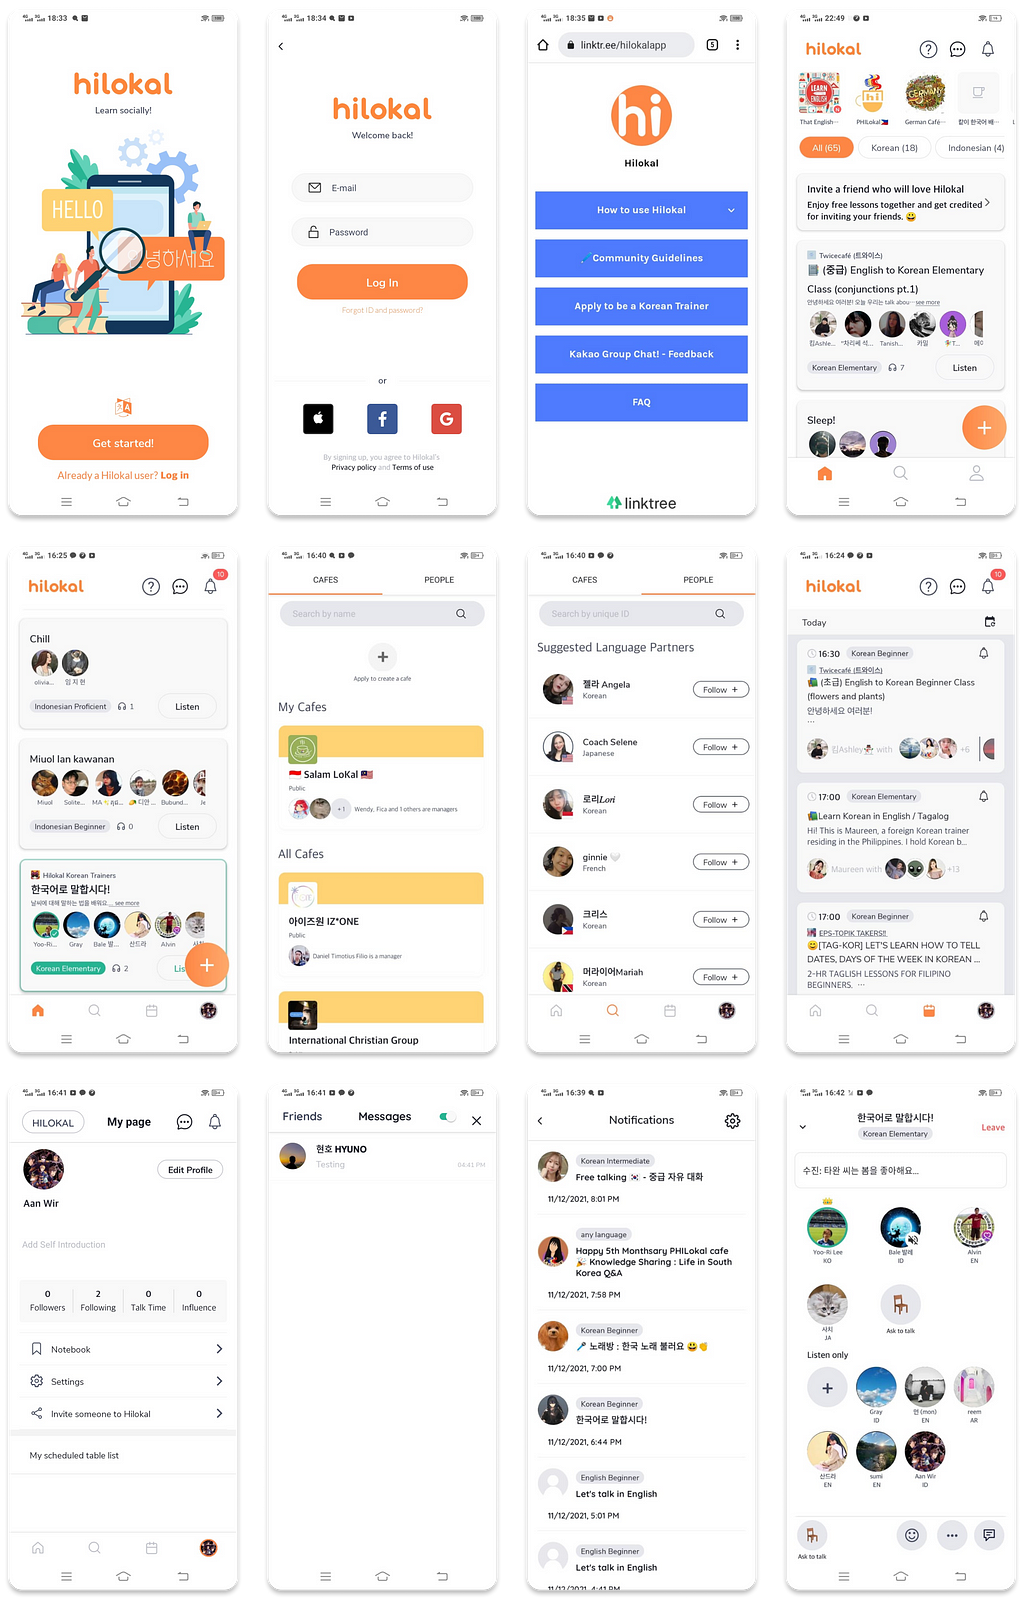 User interfaces of the Hilokal app version 2.0.2